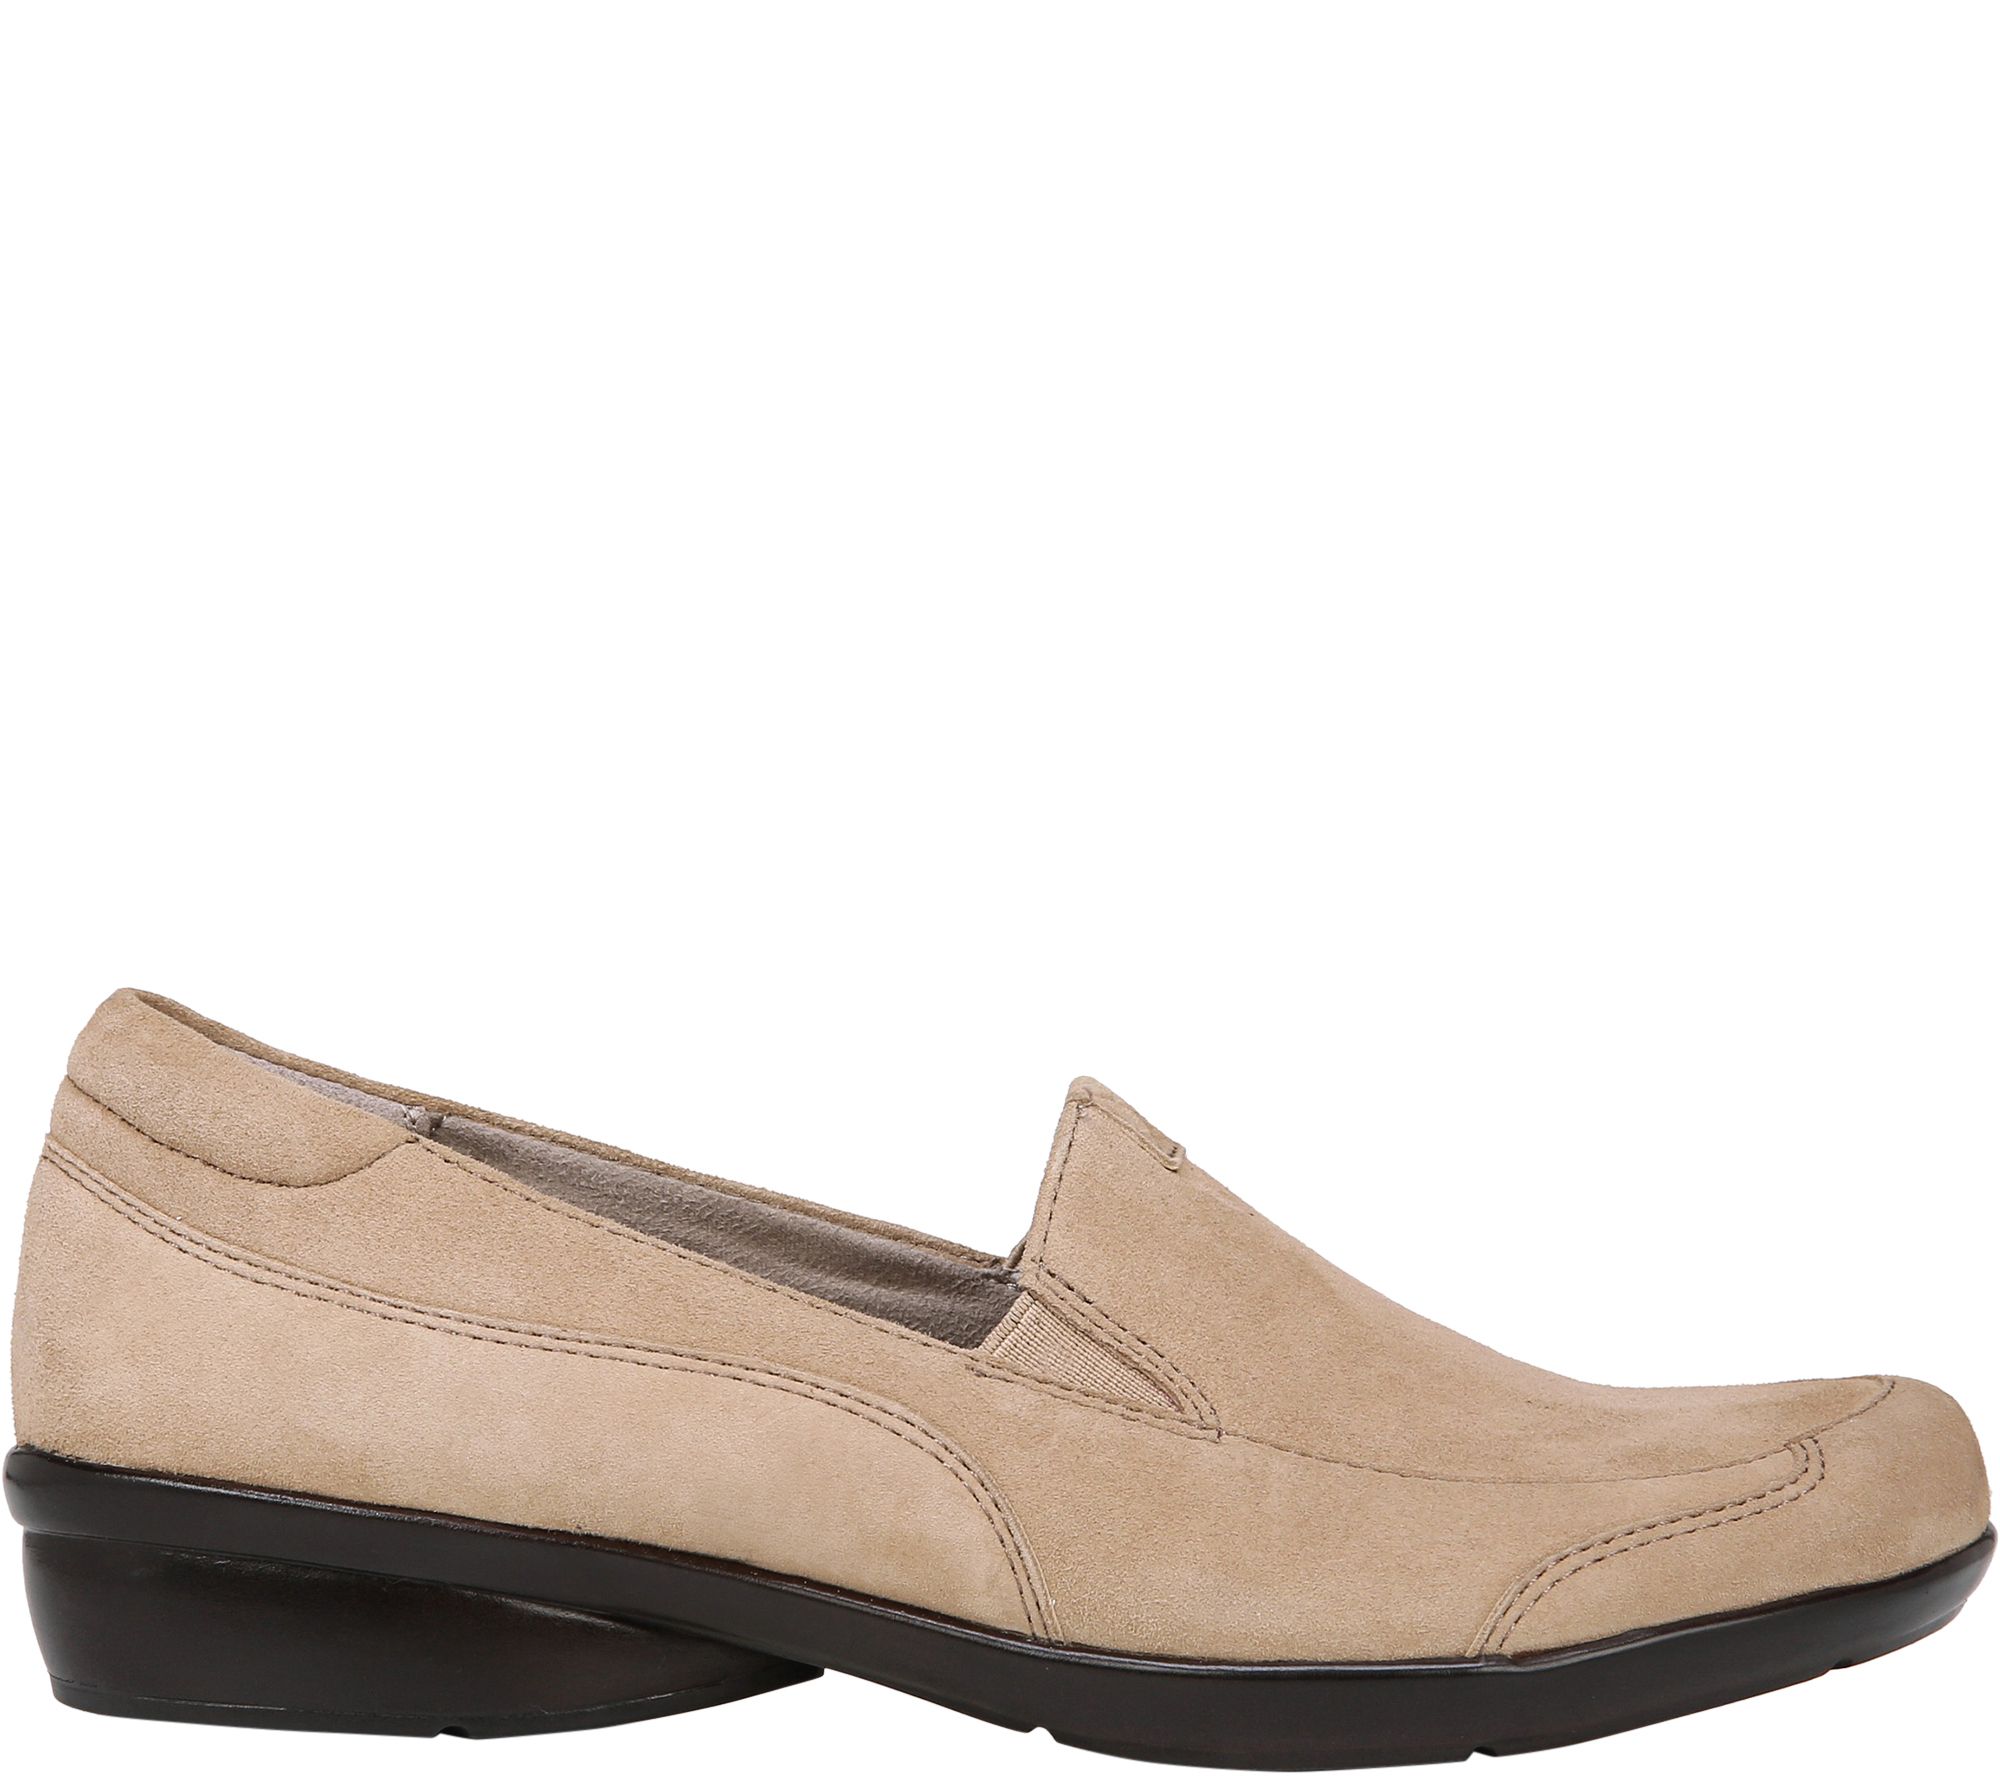 Naturalizer Leather Slip On Loafers - Channing - QVC.com